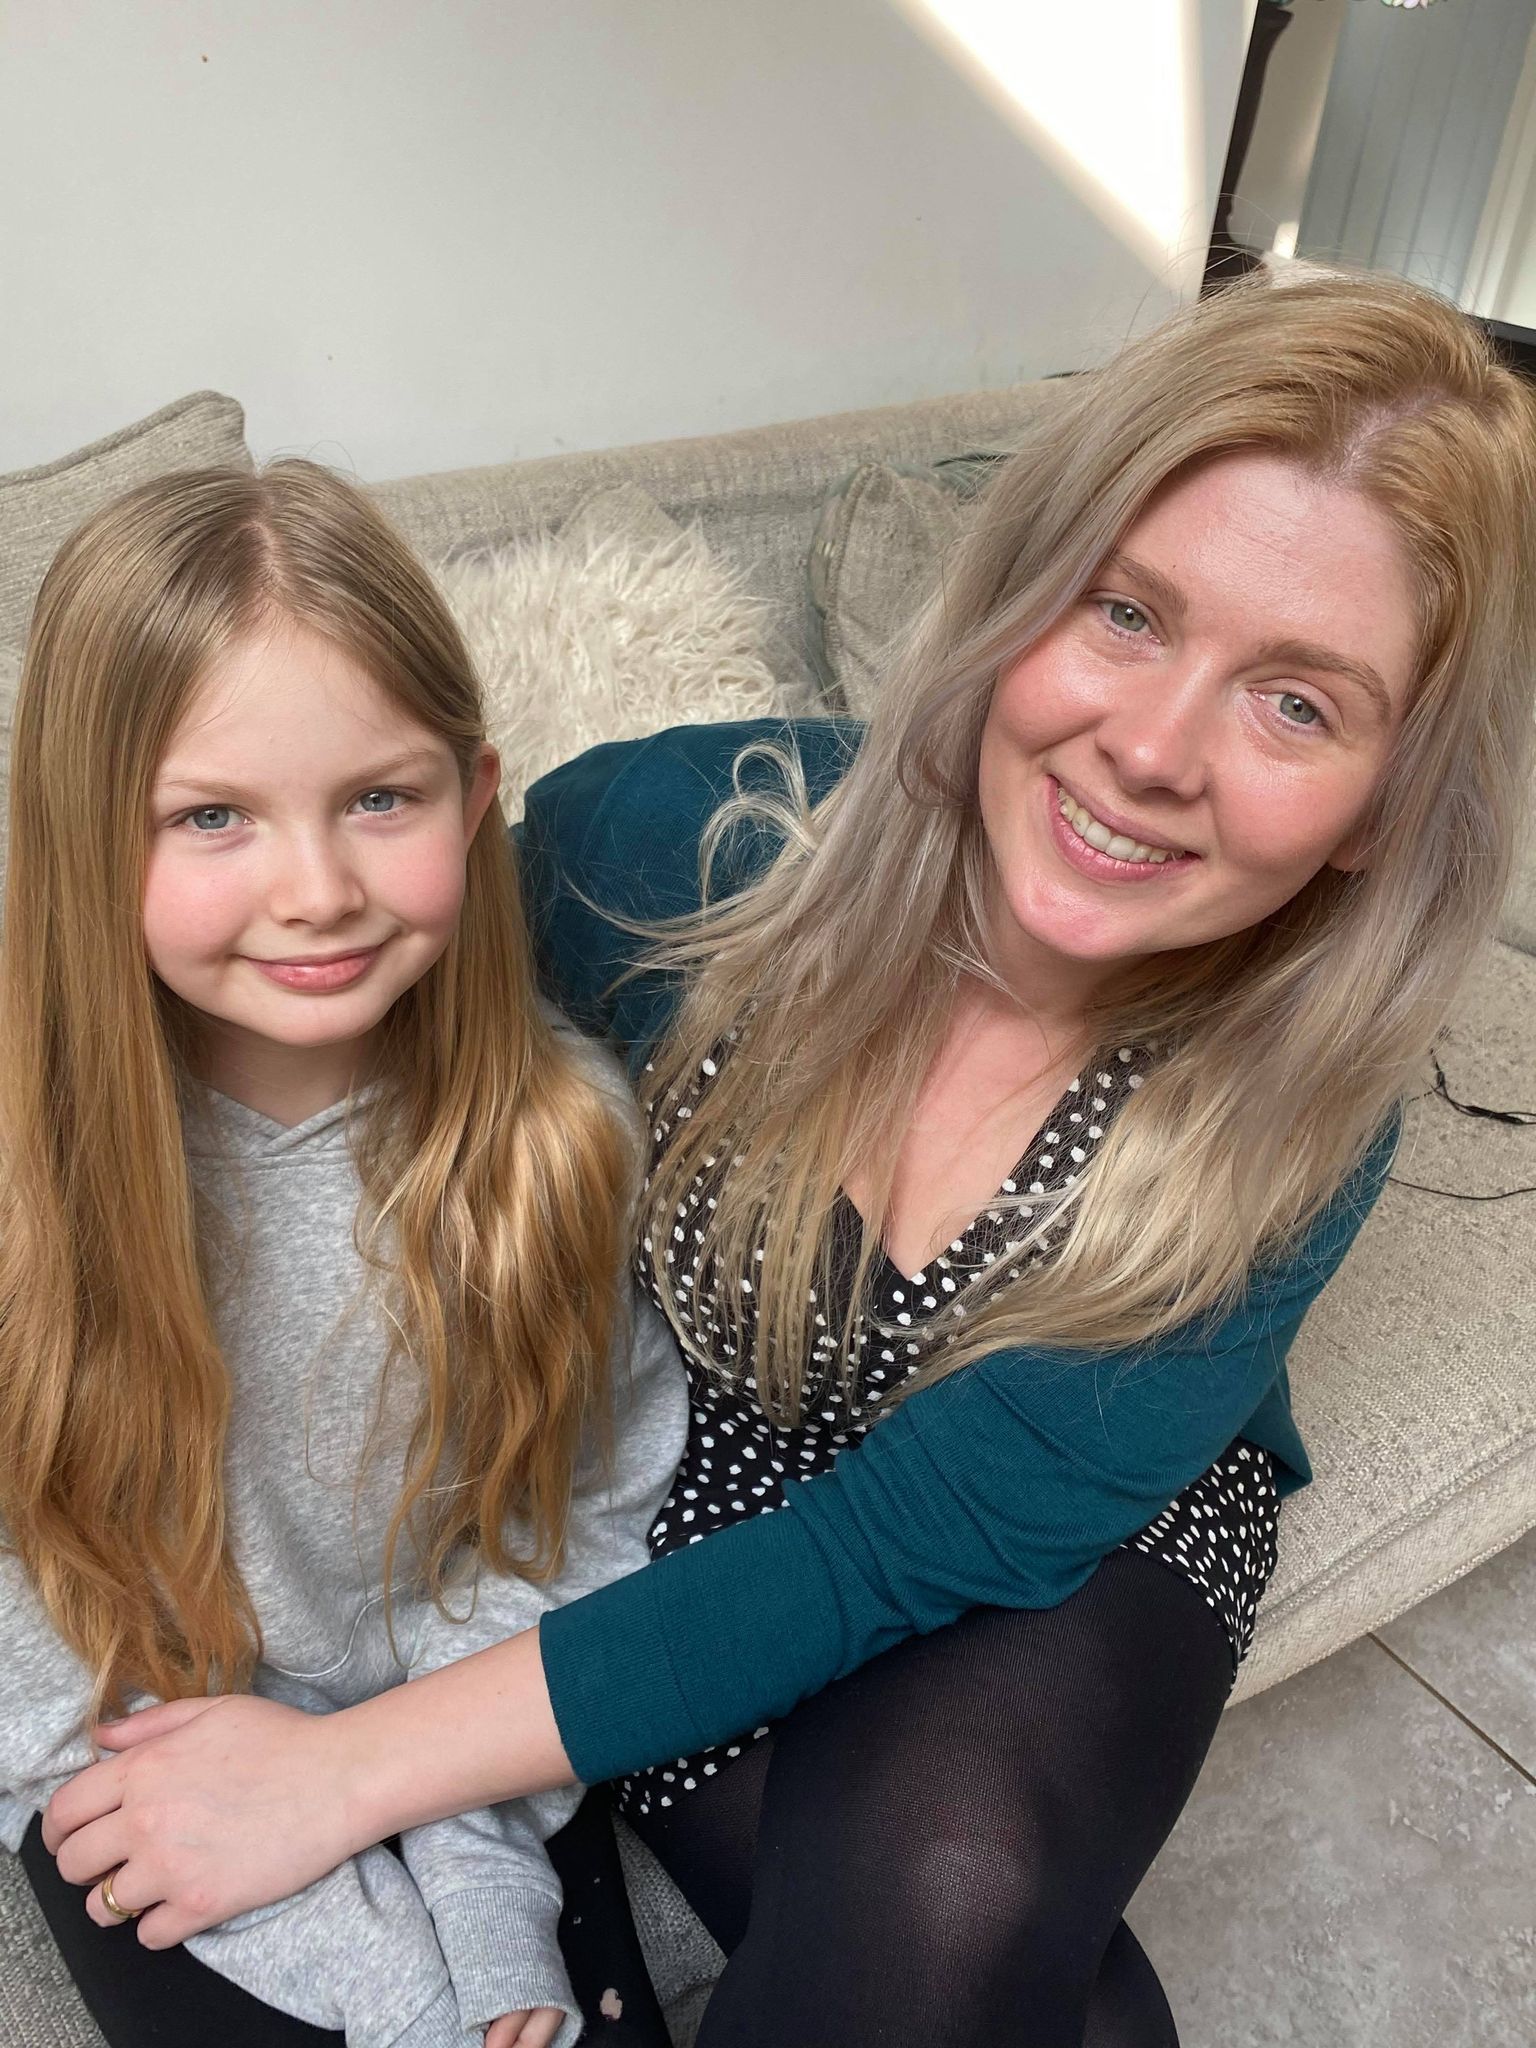 LONG COMMUTE: Amelie Roughley, ten, with mum Misha. Amelie is facing travelling from Bradwell to Brightlingsea for school